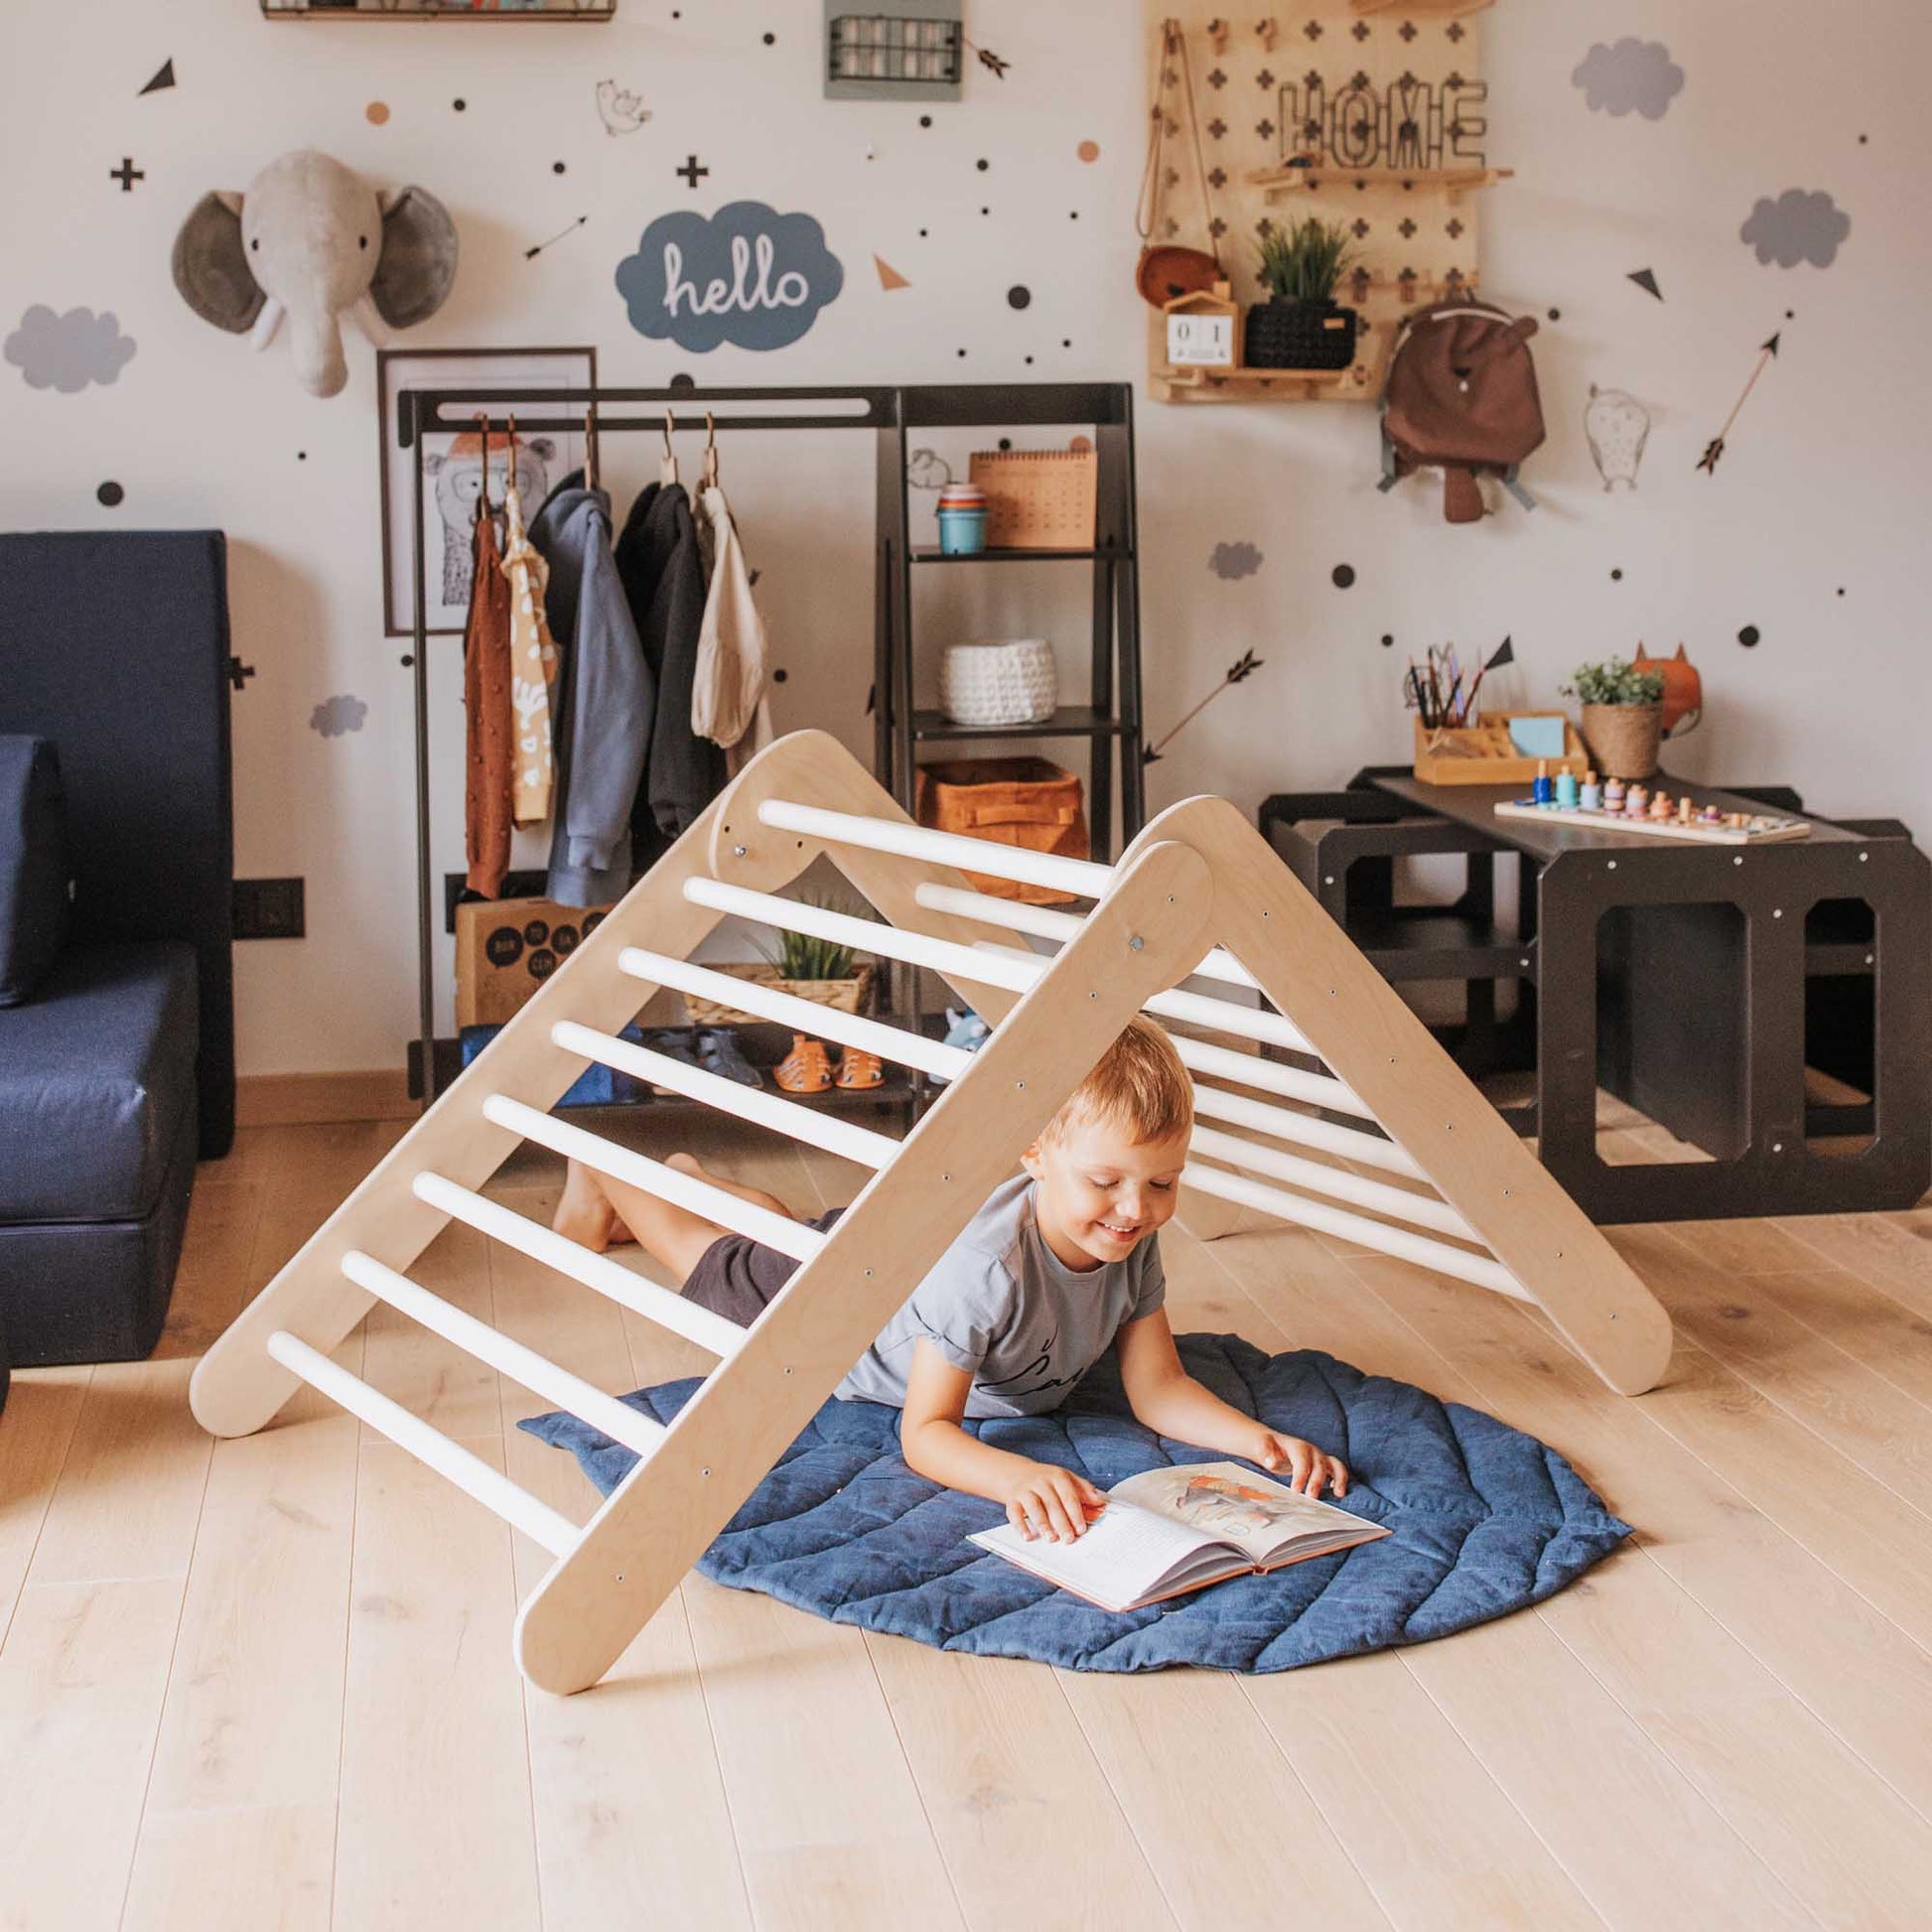 A child is playing in a room with a wooden play structure, specifically a Sweet Home From Wood Montessori climber which includes a climbing triangle, foldable climbing triangle, and a ramp.